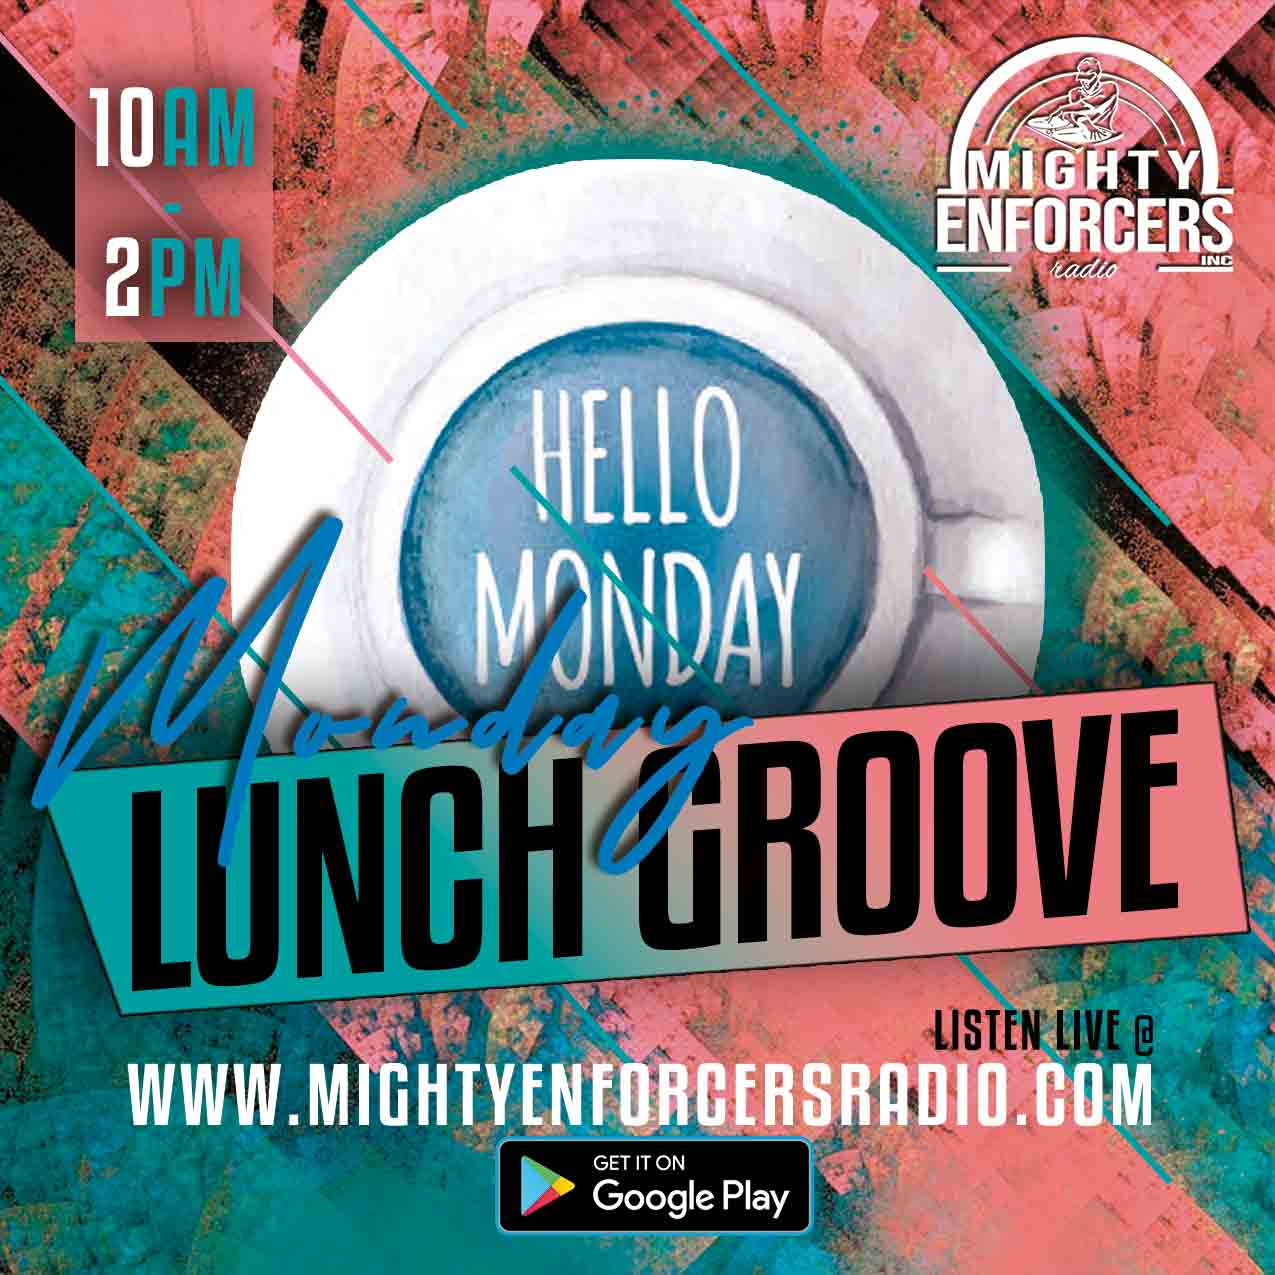 Weekday Lunch Groove